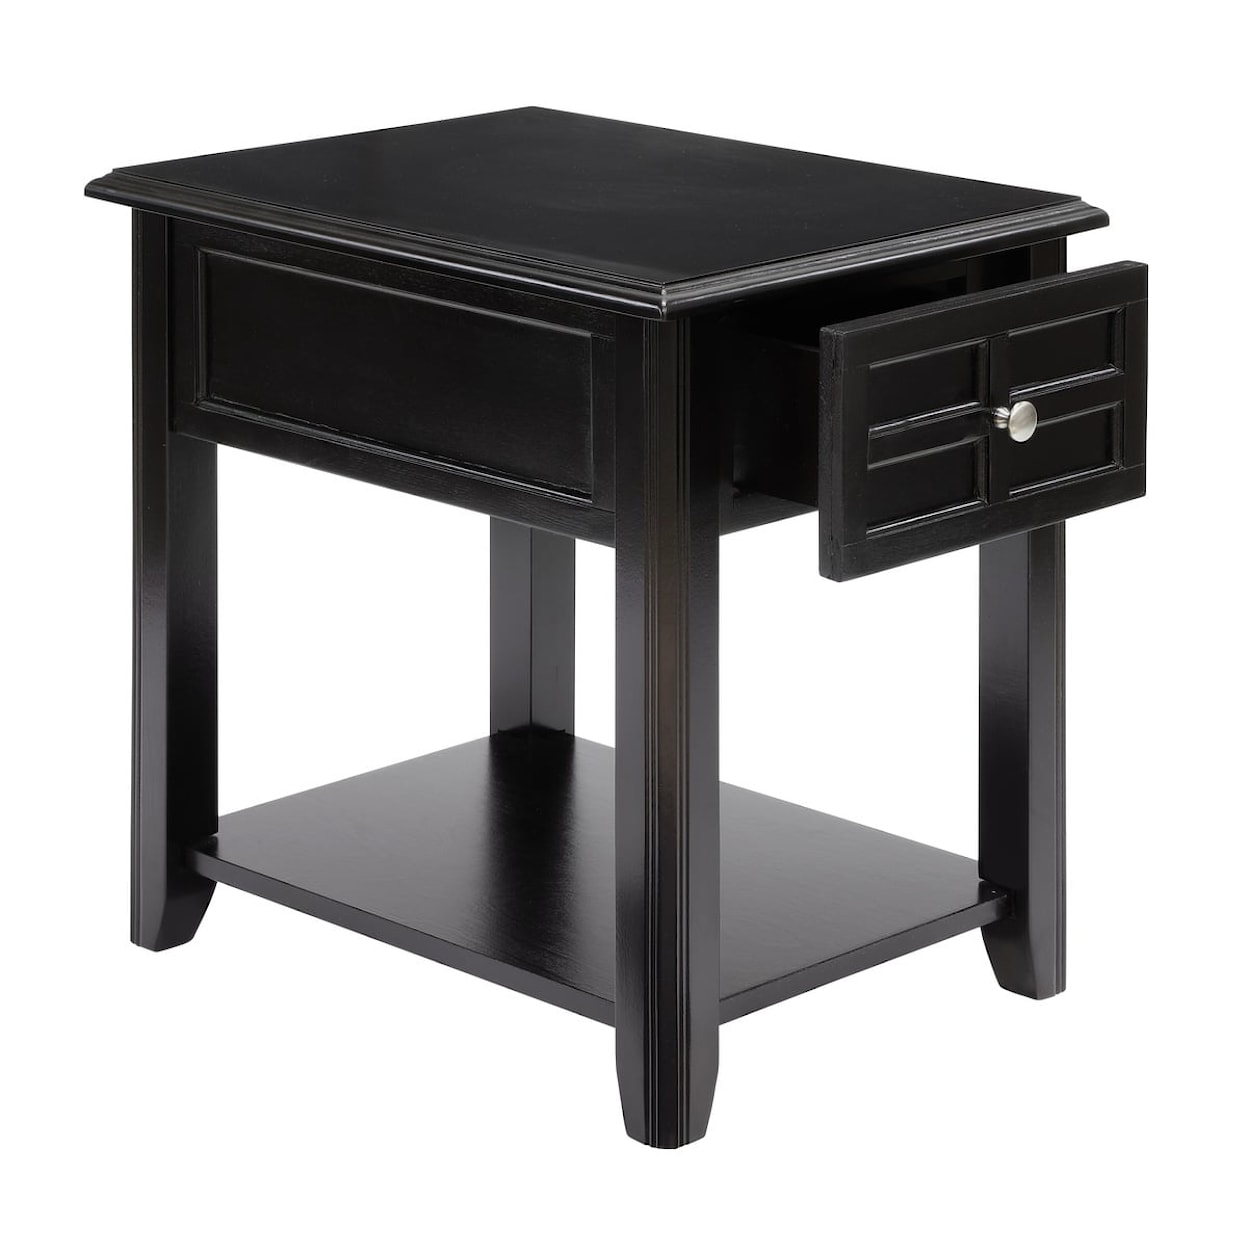 Homelegance Furniture Carrier Chairside Table